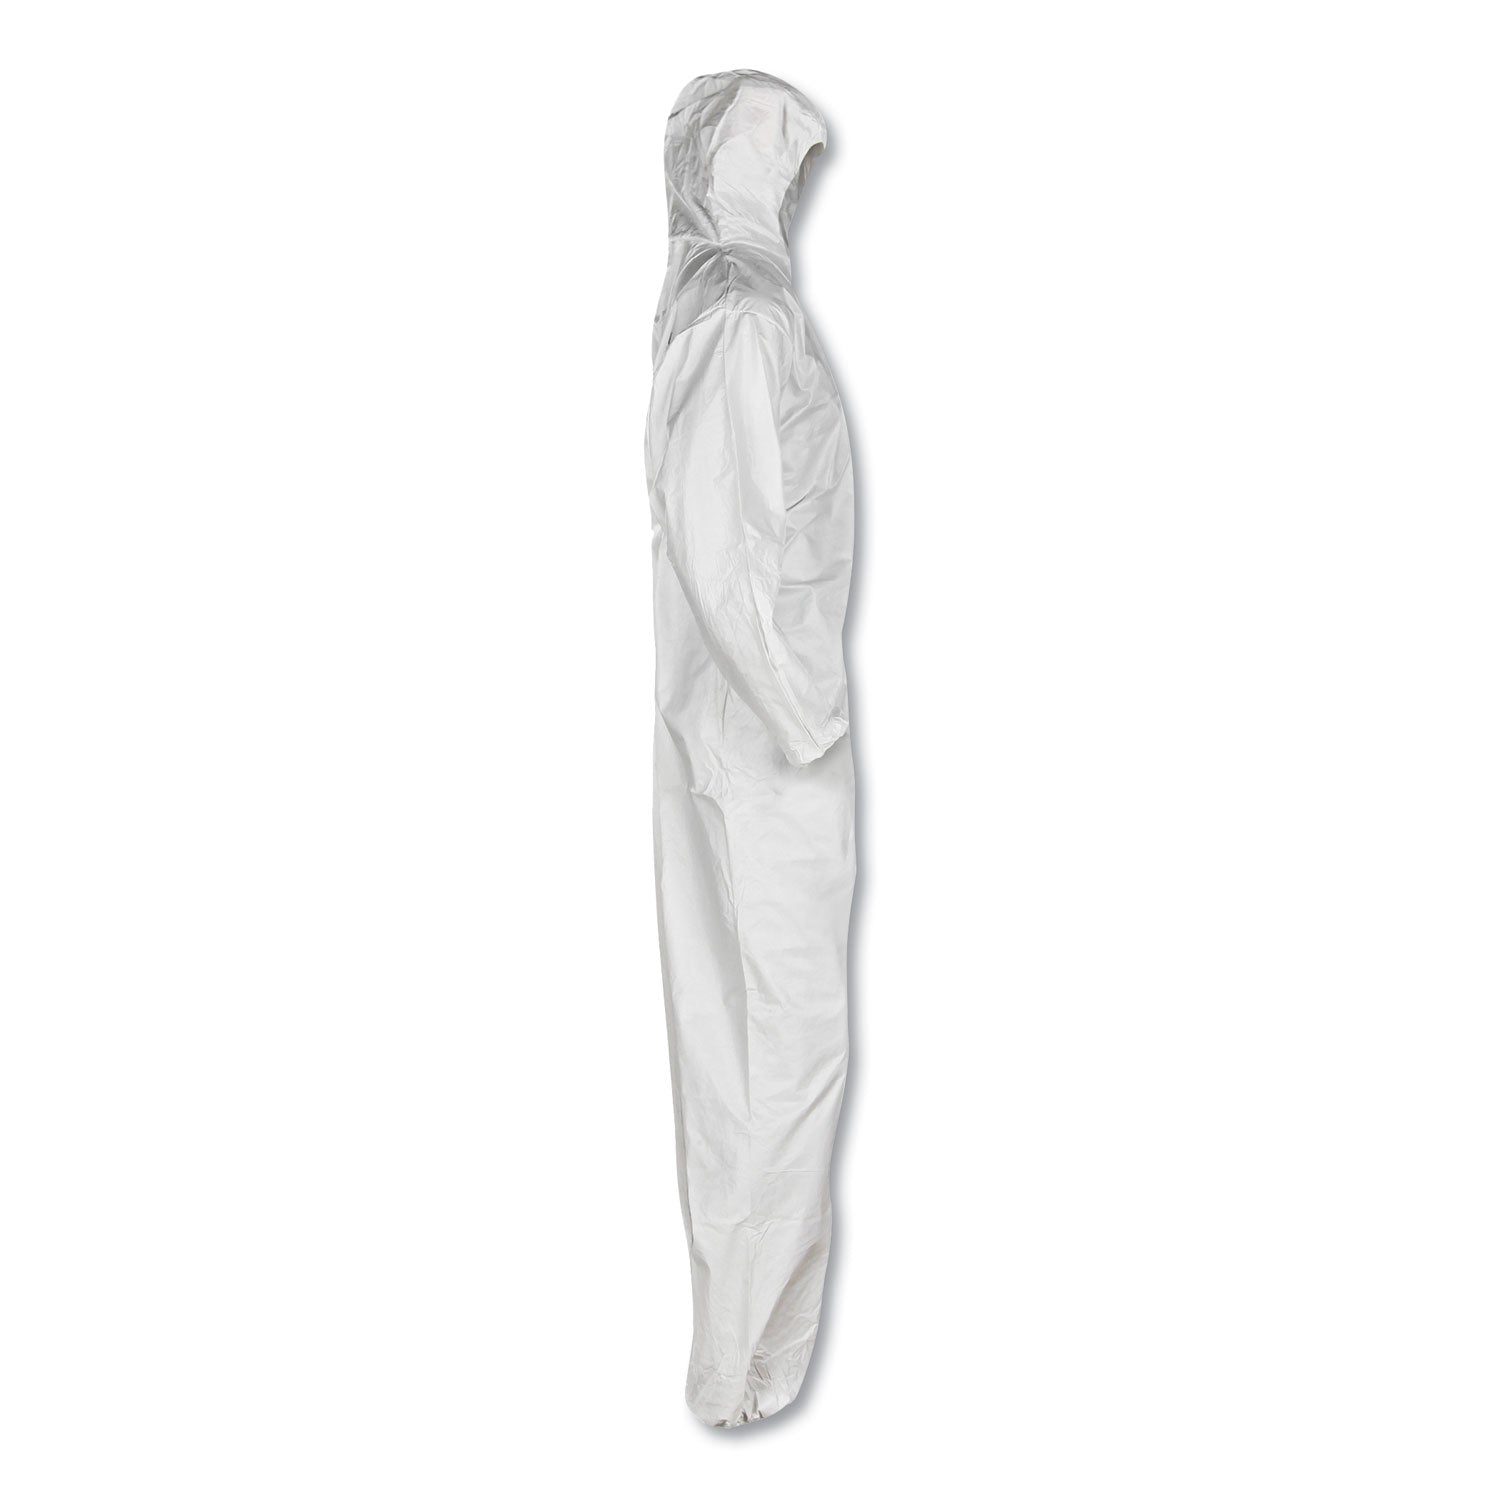 a20-breathable-particle-protection-coveralls-zip-closure-2x-large-white_kcc49115 - 5